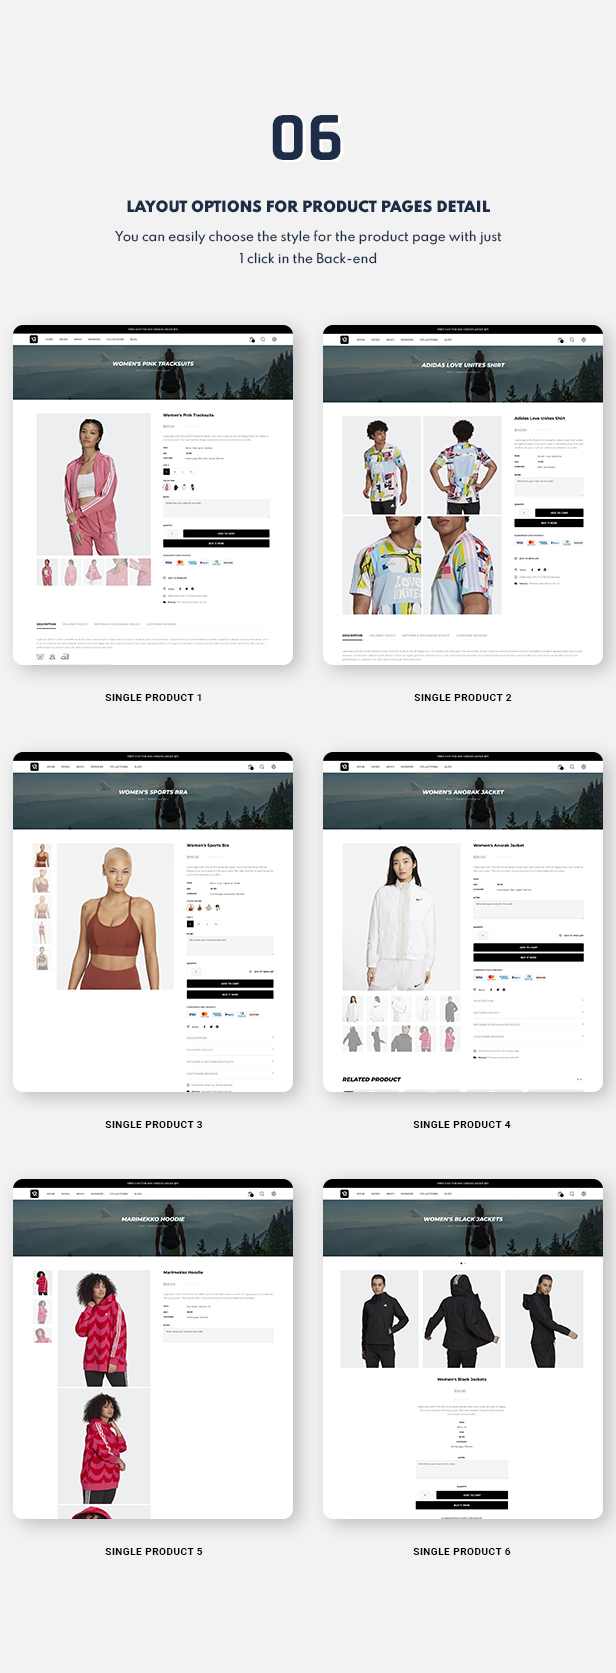 6 different layout options for product pages detail.